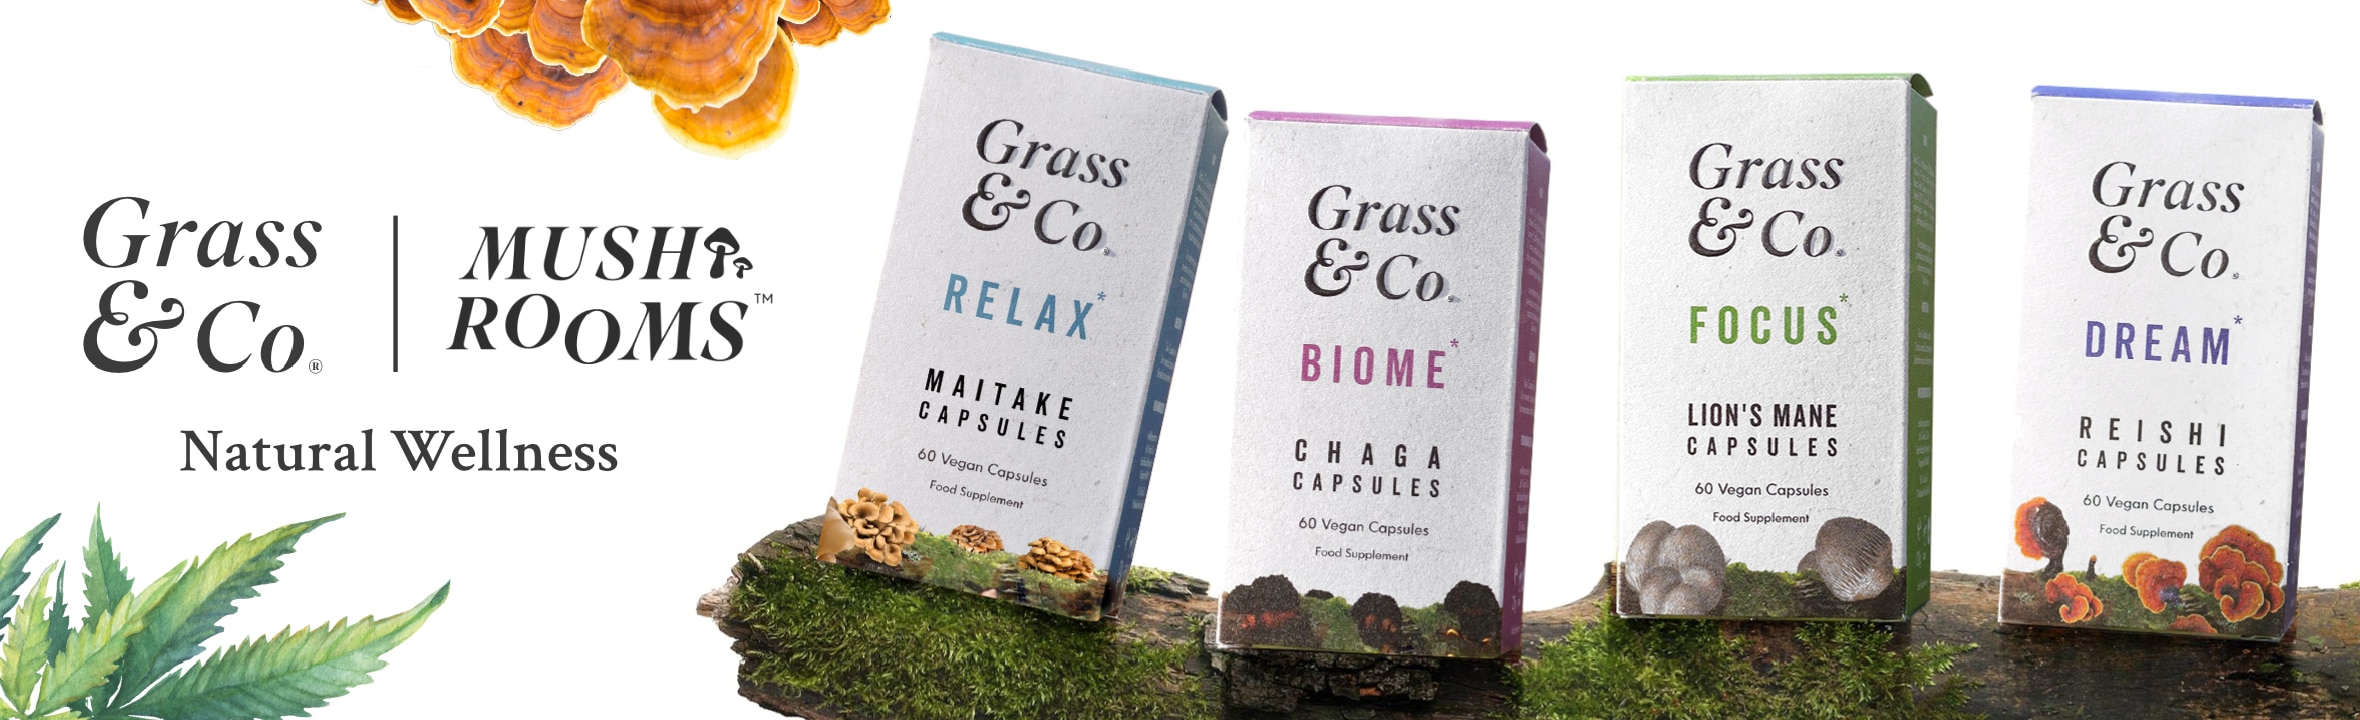 grass & co product shot